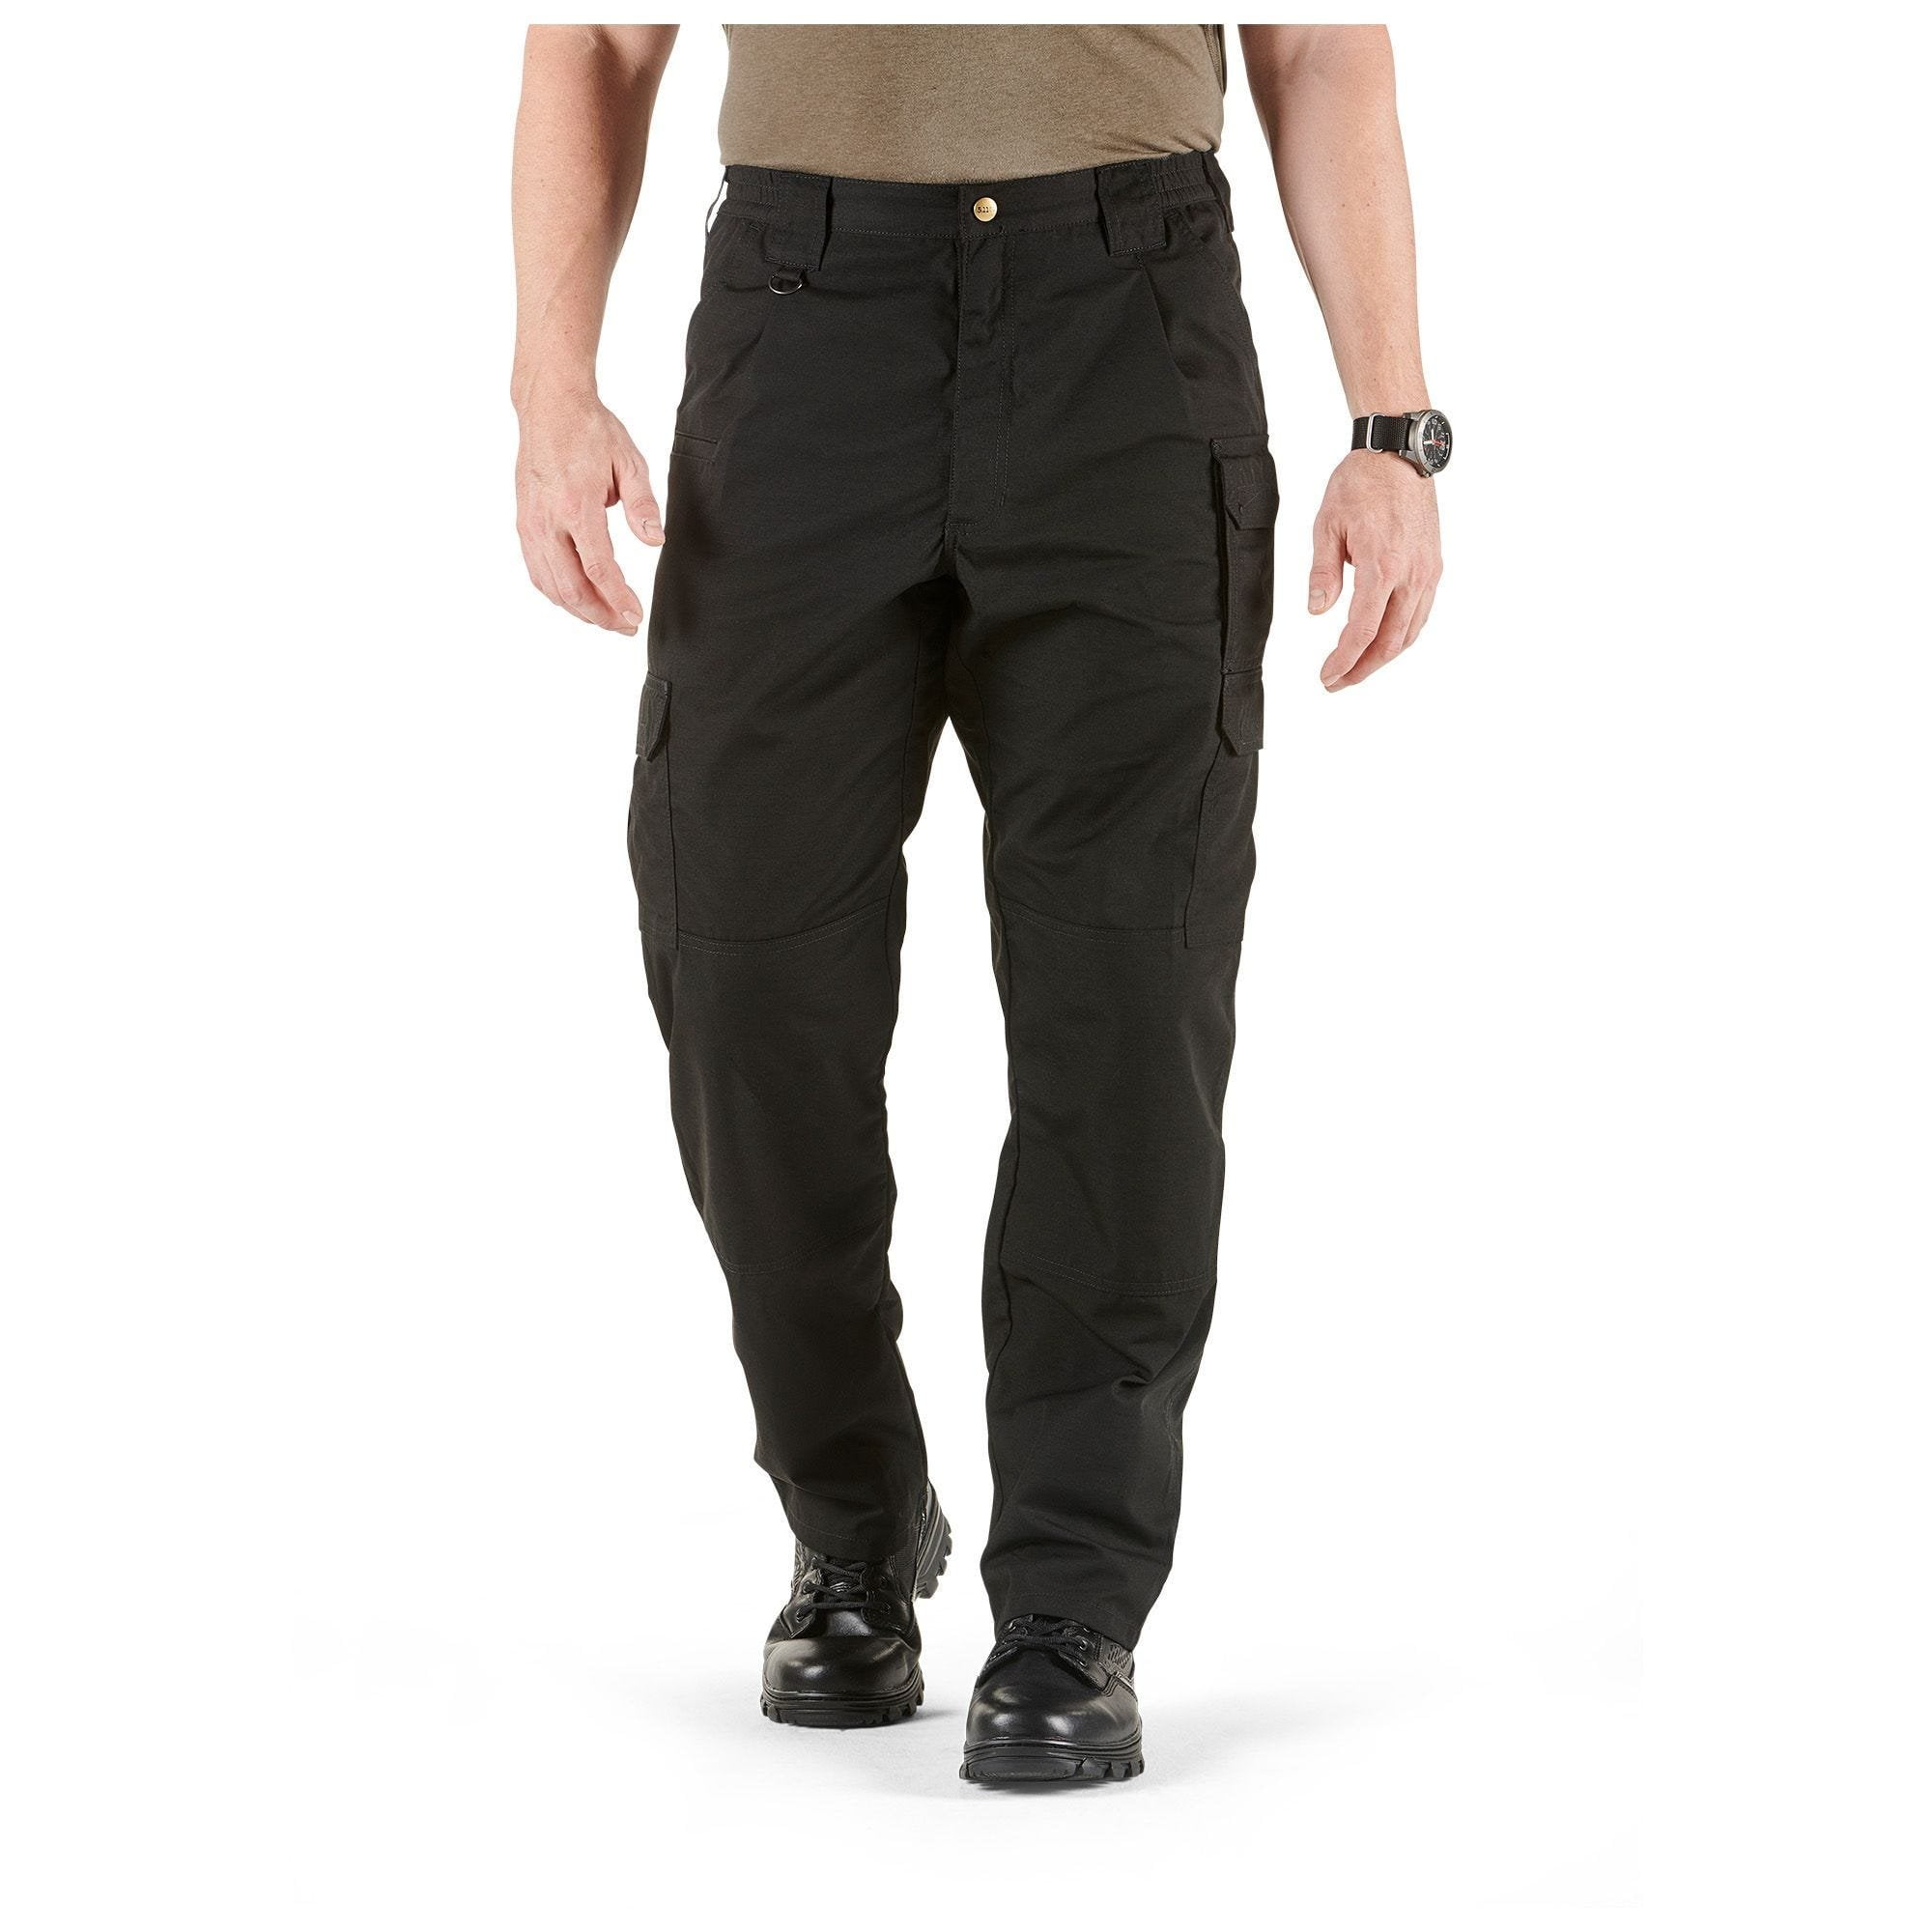 5.11 Tactical Mens Taclite Pro Work Pants Style 74273 Lightweight Poly-Cotton Ripstop Fabric 